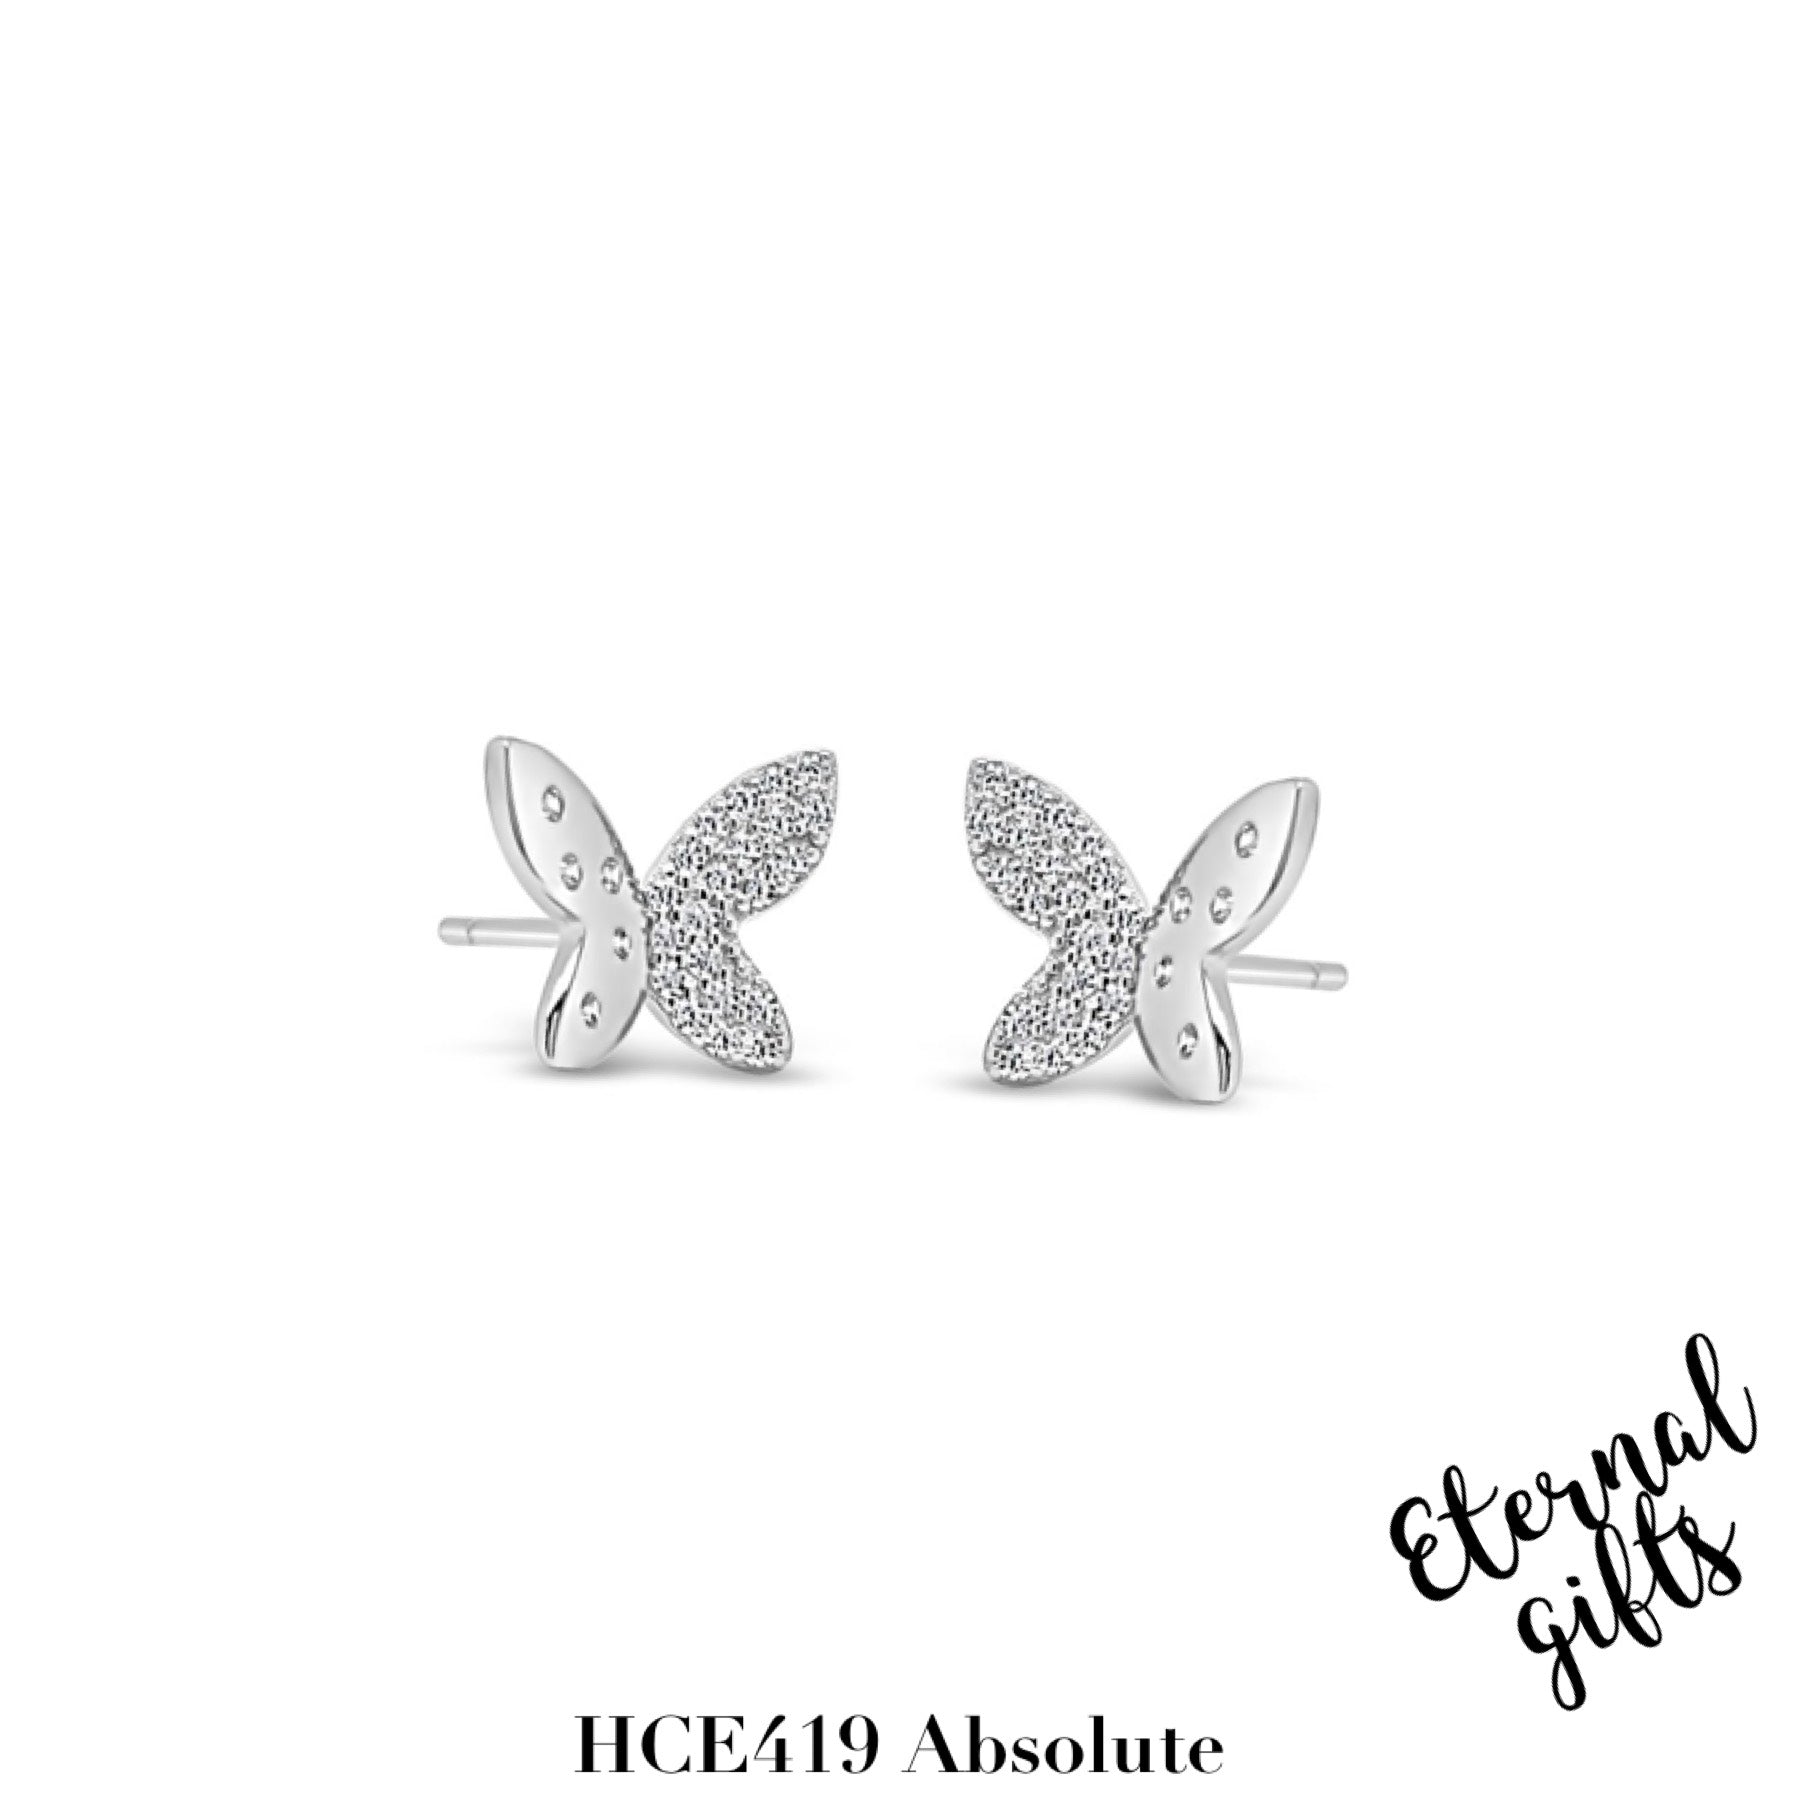 Silver Butterfly Stud Earrings HCE419 - Absolute Kids Collection